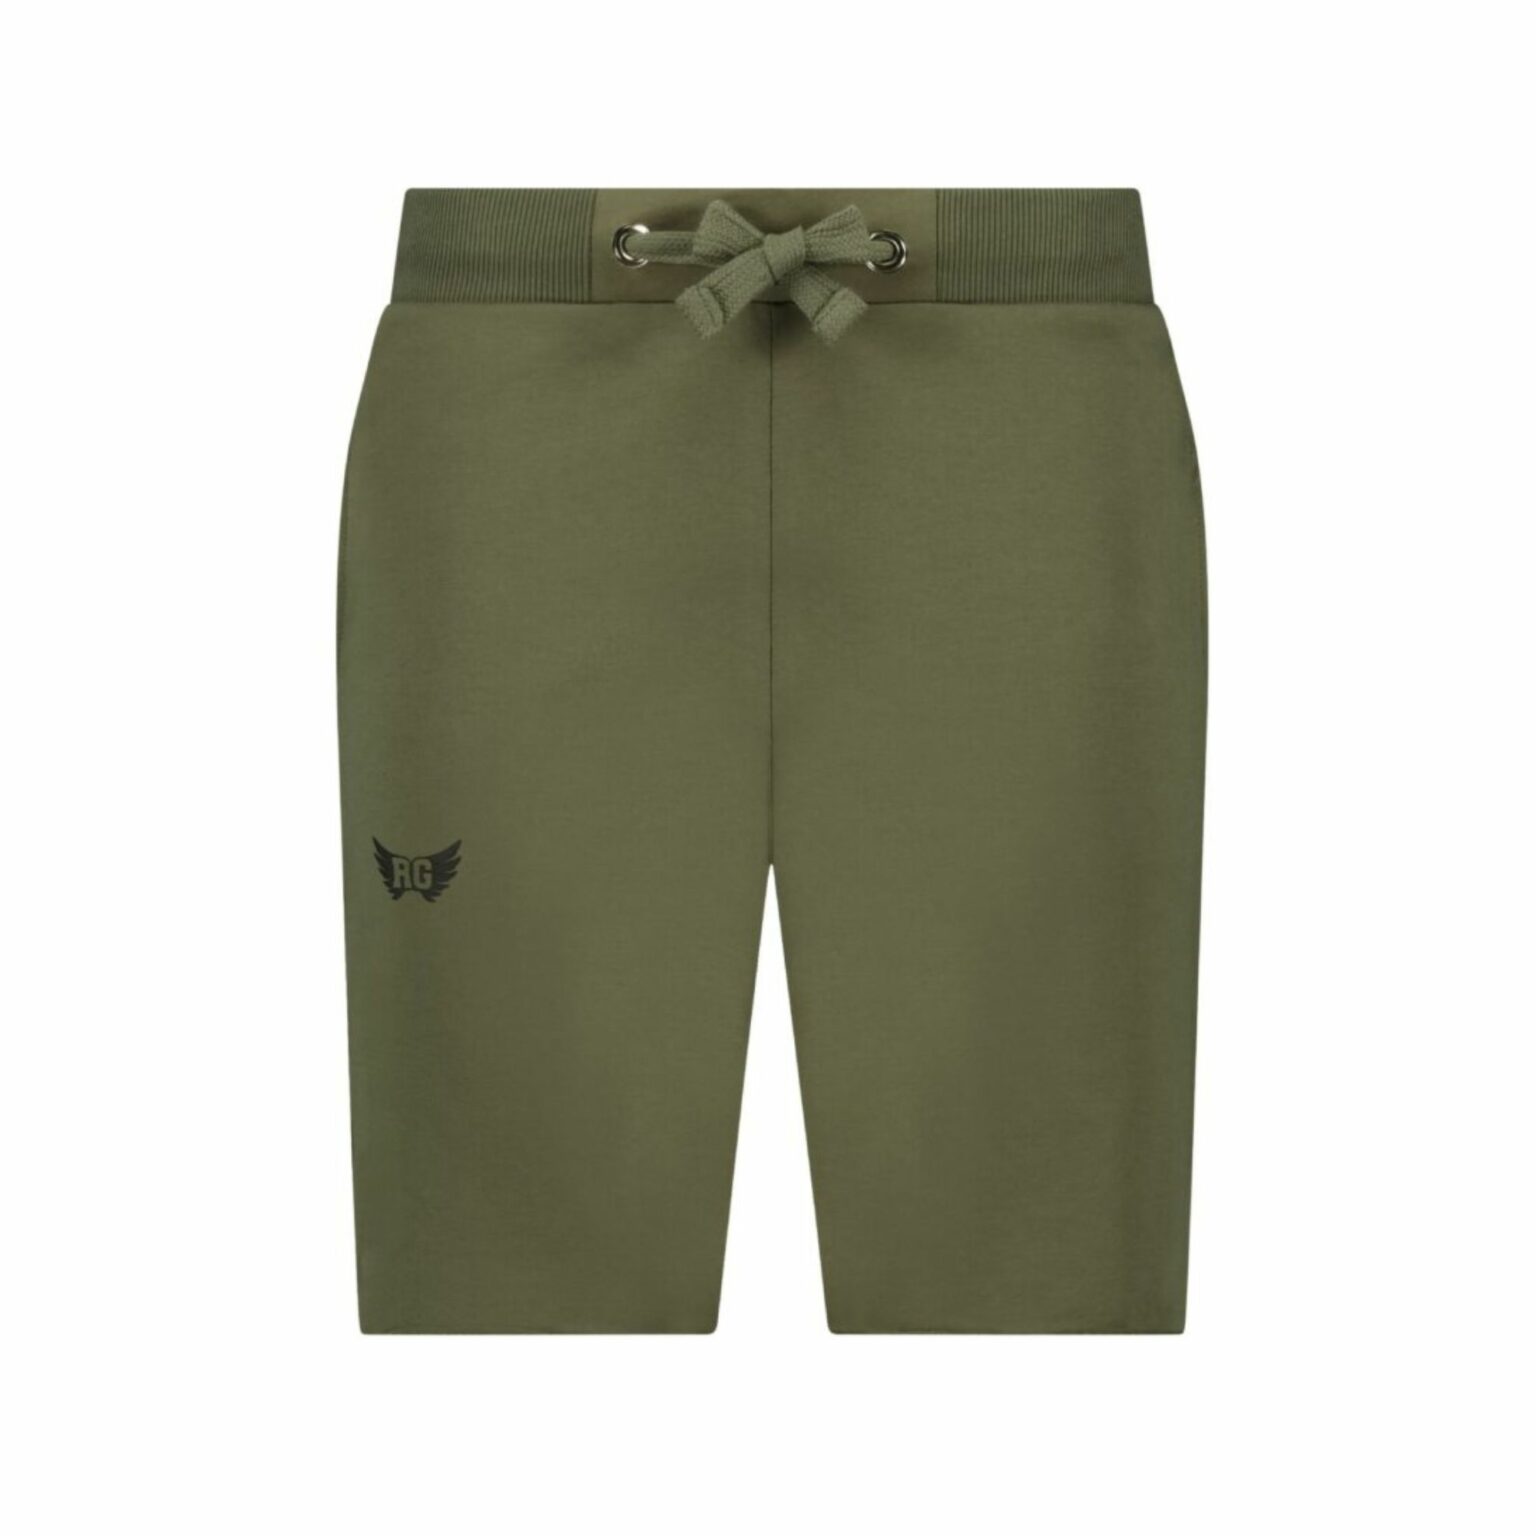 bodhi-shorts-olive-green-front